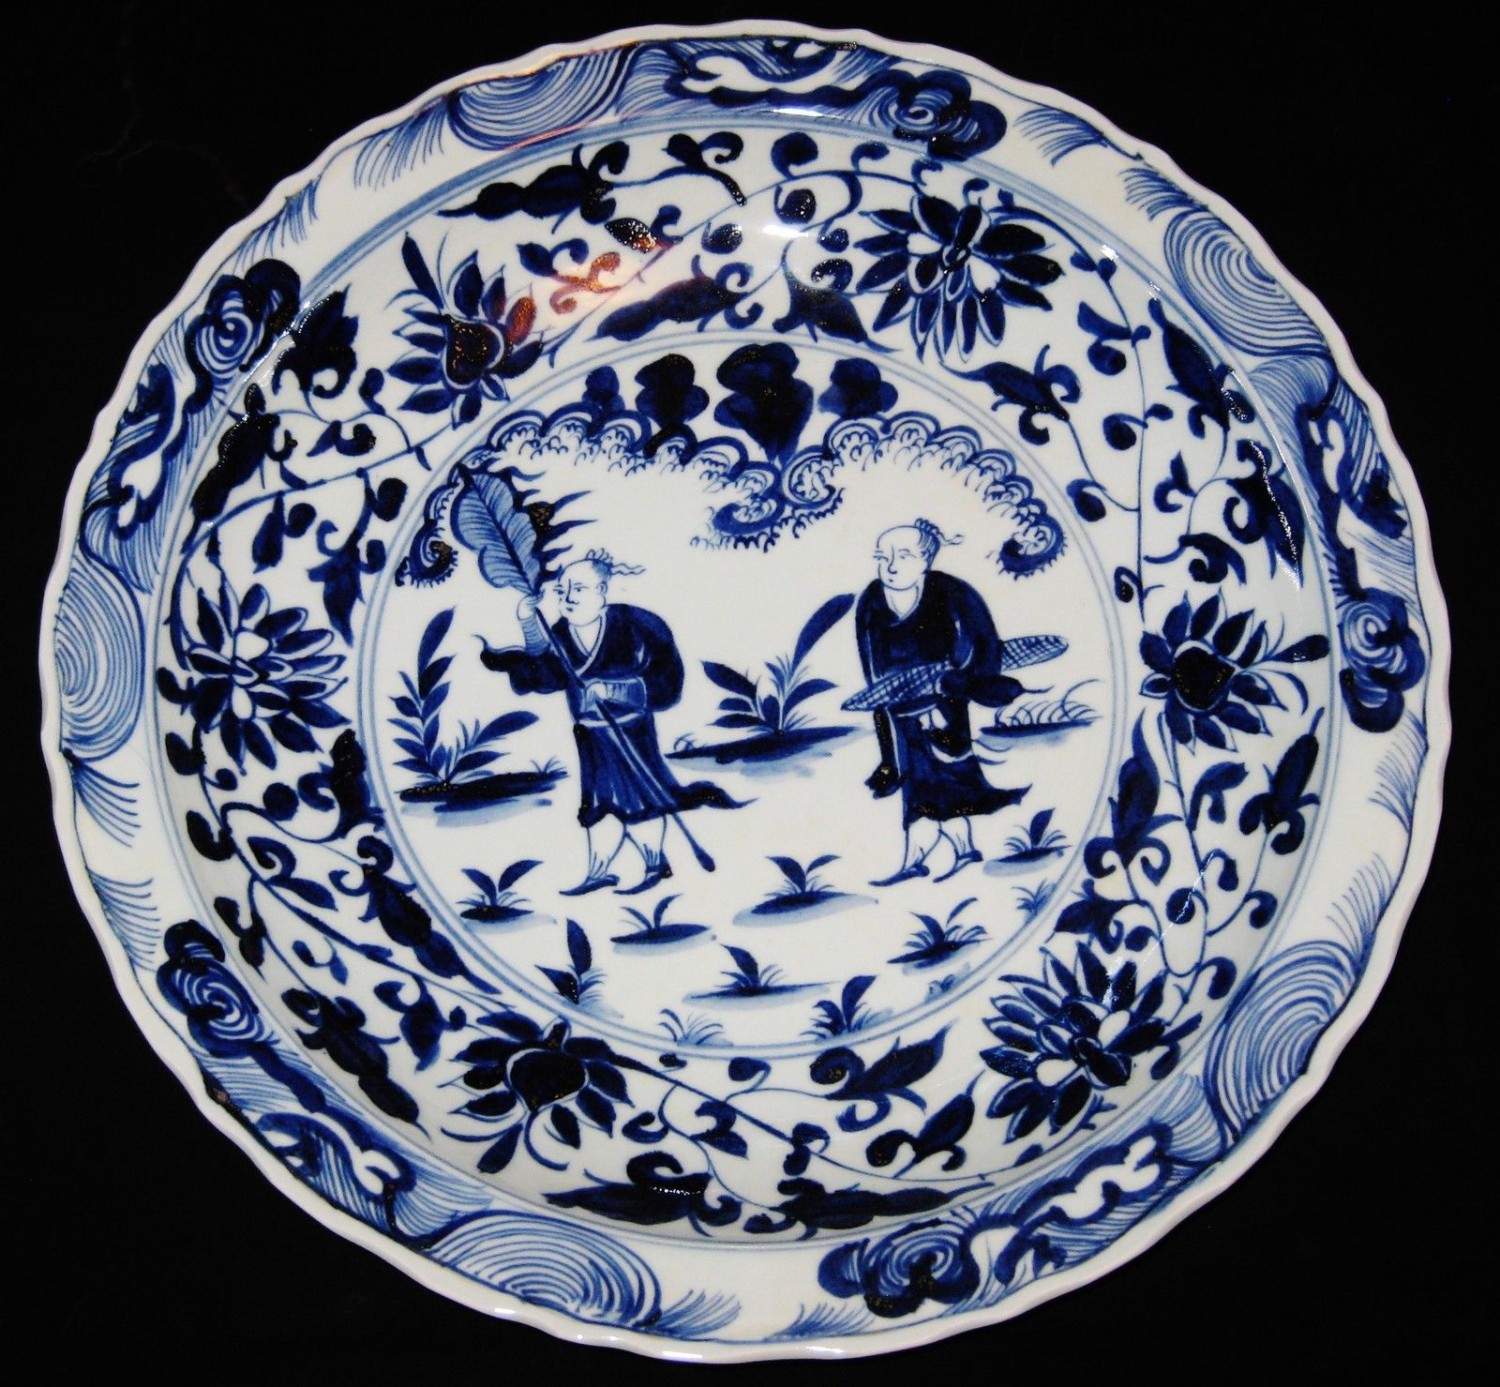 ANTIQUE CHINESE PORCELAIN, 44.5 CM B&W CHARGER, 19TH C, XUANDE MARK.